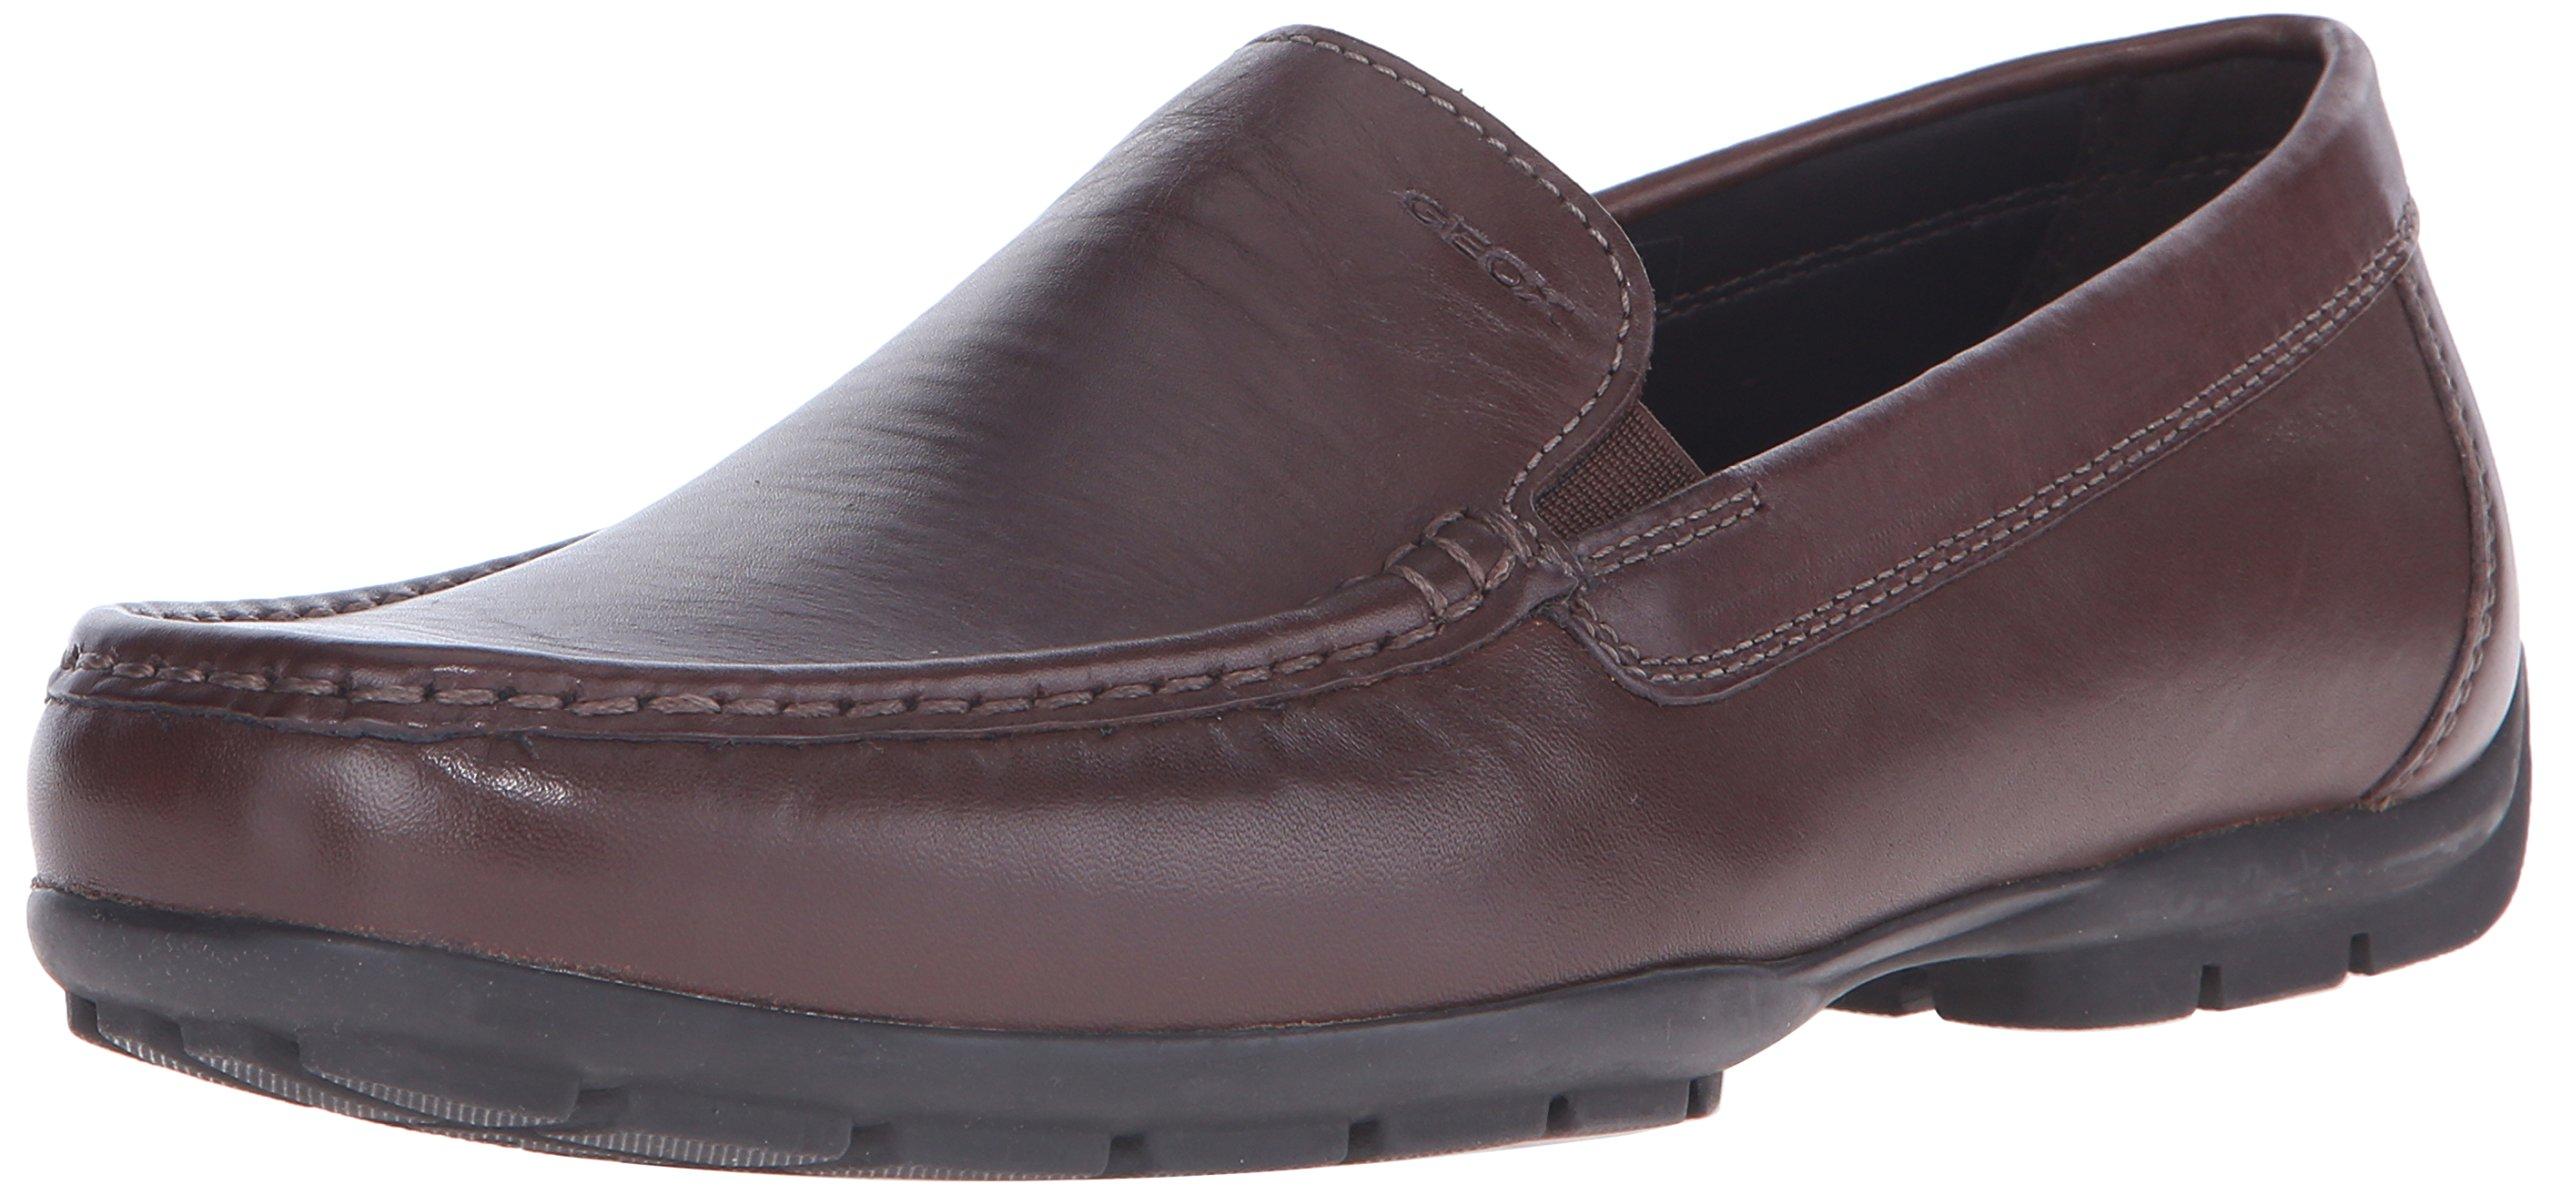 Geox Leather Mmonetw2fit4 Slip-on Loafer in Light Brown (Brown) for Men ...